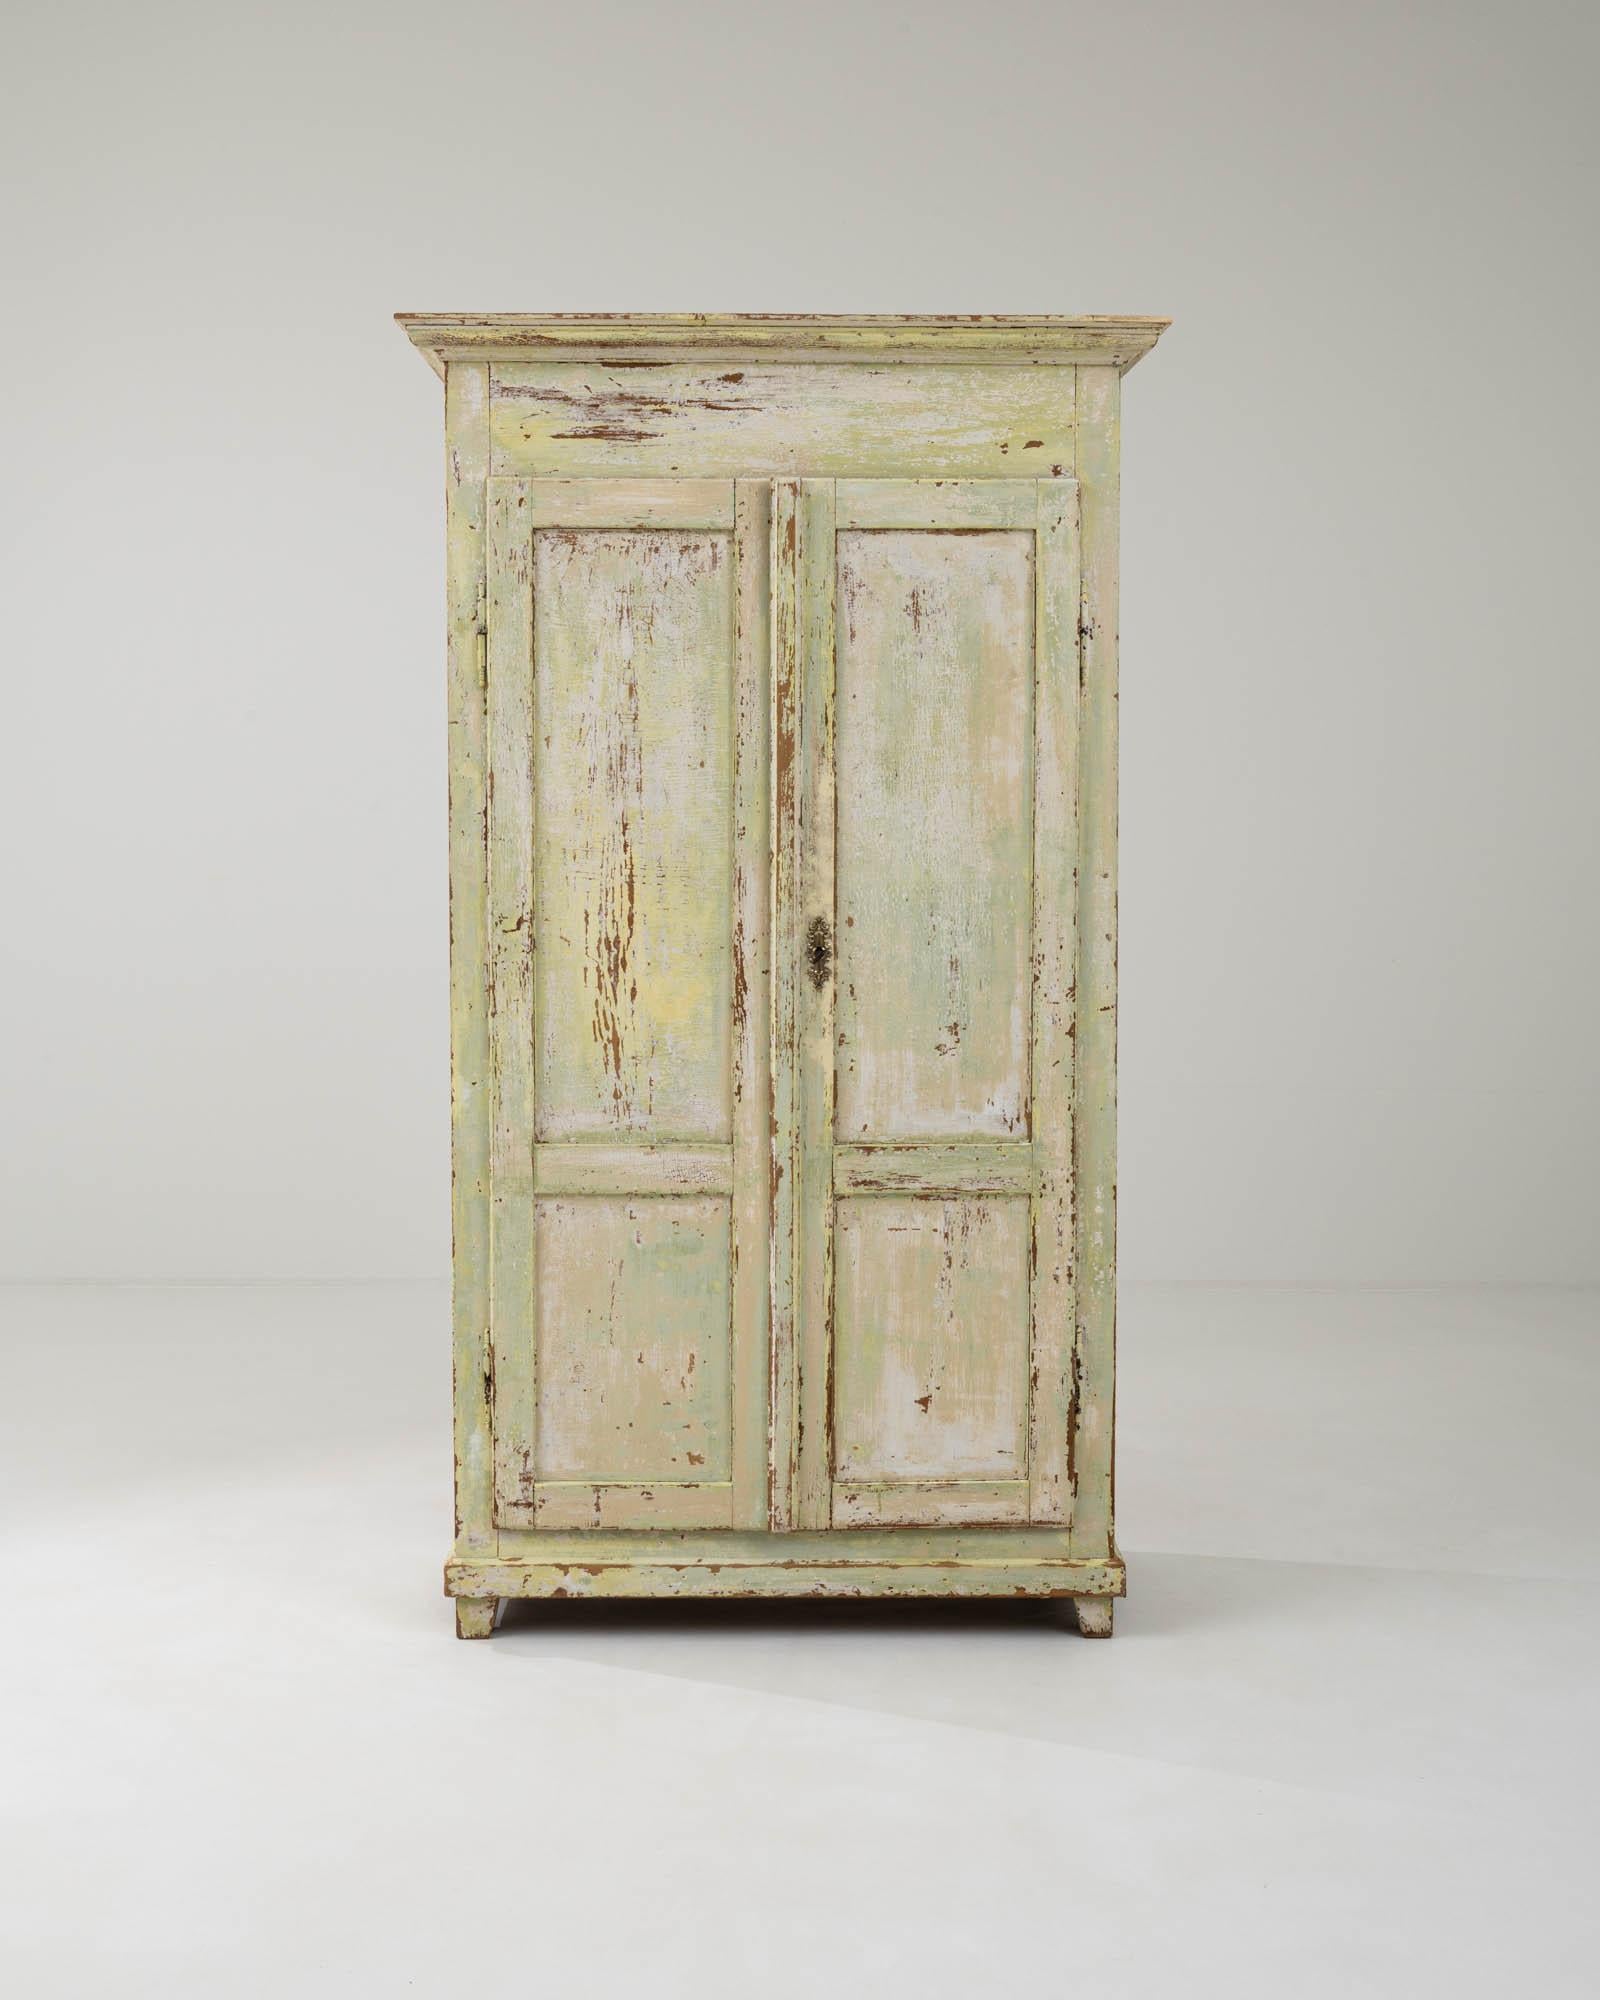 Crafted during the 19th century in France, this antique wooden cabinet showcases a distinctive patina gradient, transitioning from light green to yellow-white, with a subtly distressed finish that reveals the soft tawny wood underneath. The